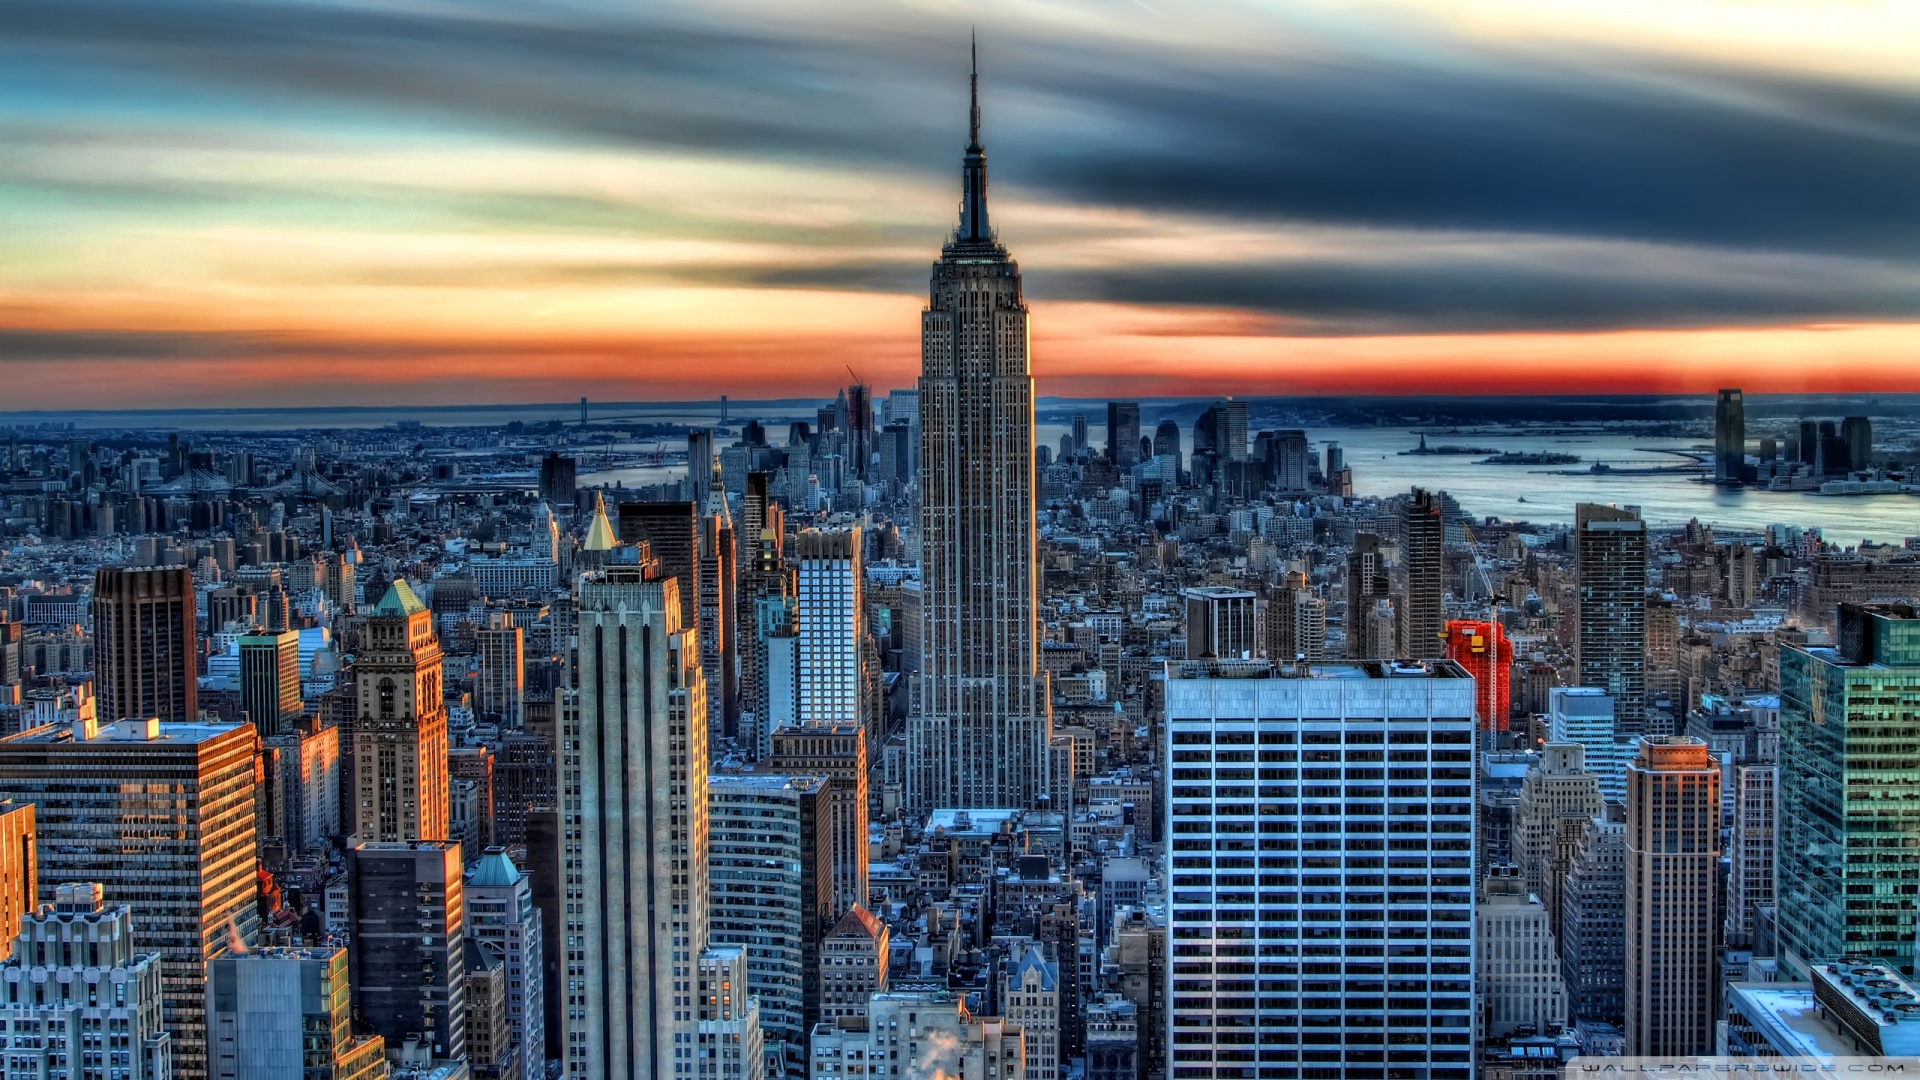 Empire State Building Wallpaper Image In Collection